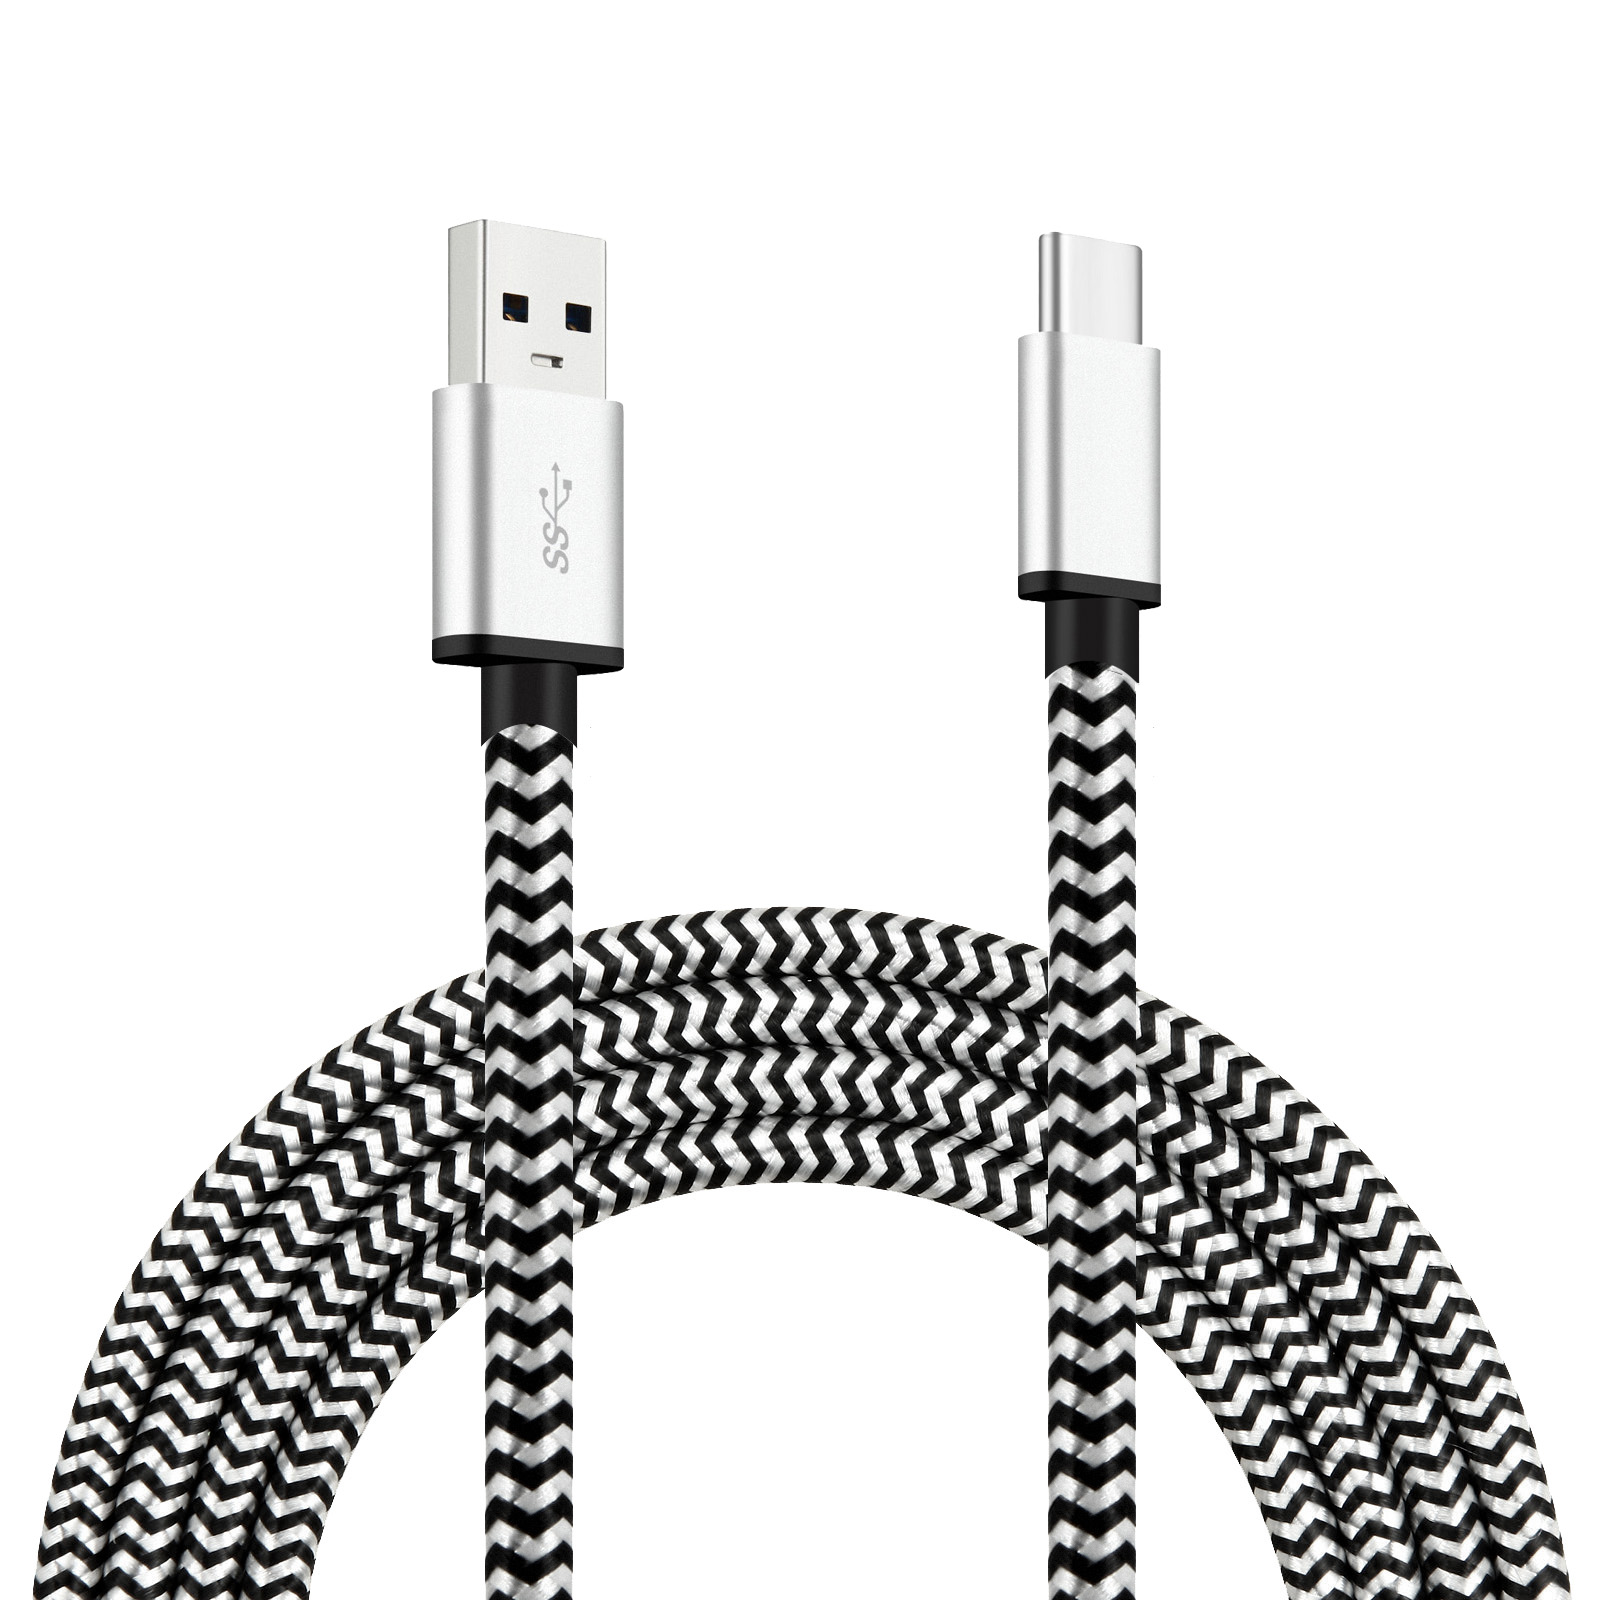 URANT Type C Cable(3A), 6.6FT Fast Charging Cable Phone Charger Nylon Braided USB 3.0 for Macbook LG G5/G6/V20, Nexus 5X/6P, Samsung Galaxy S8/Plus, Google Pixel OnePlus 2 and More